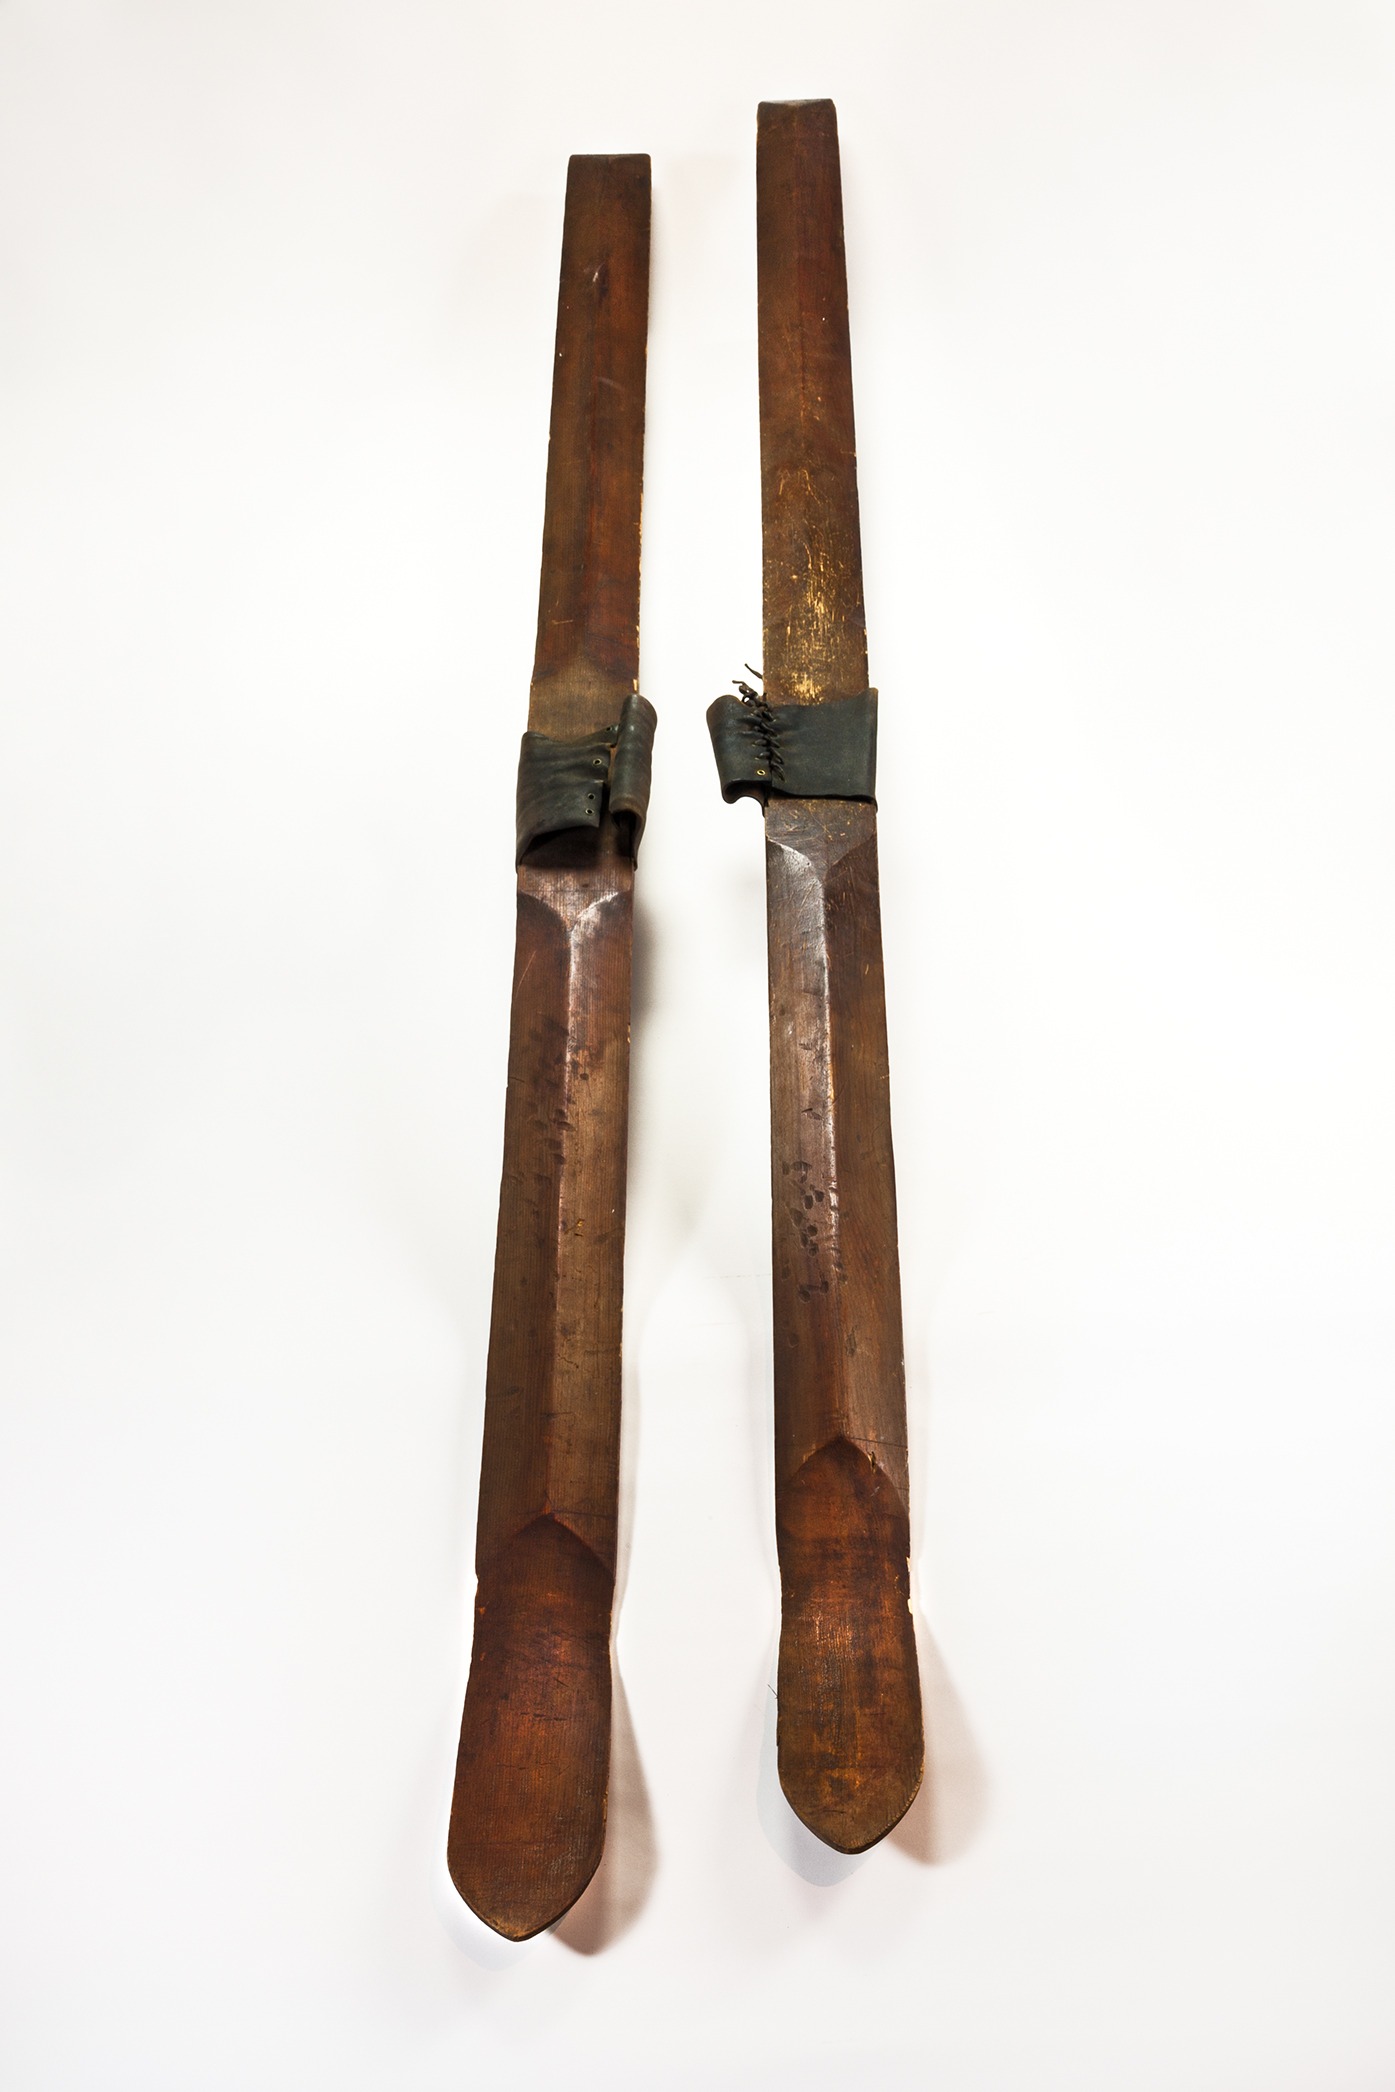 Photo of wooden skis used for early mail delivery, courtesy of the Yosemite Museum